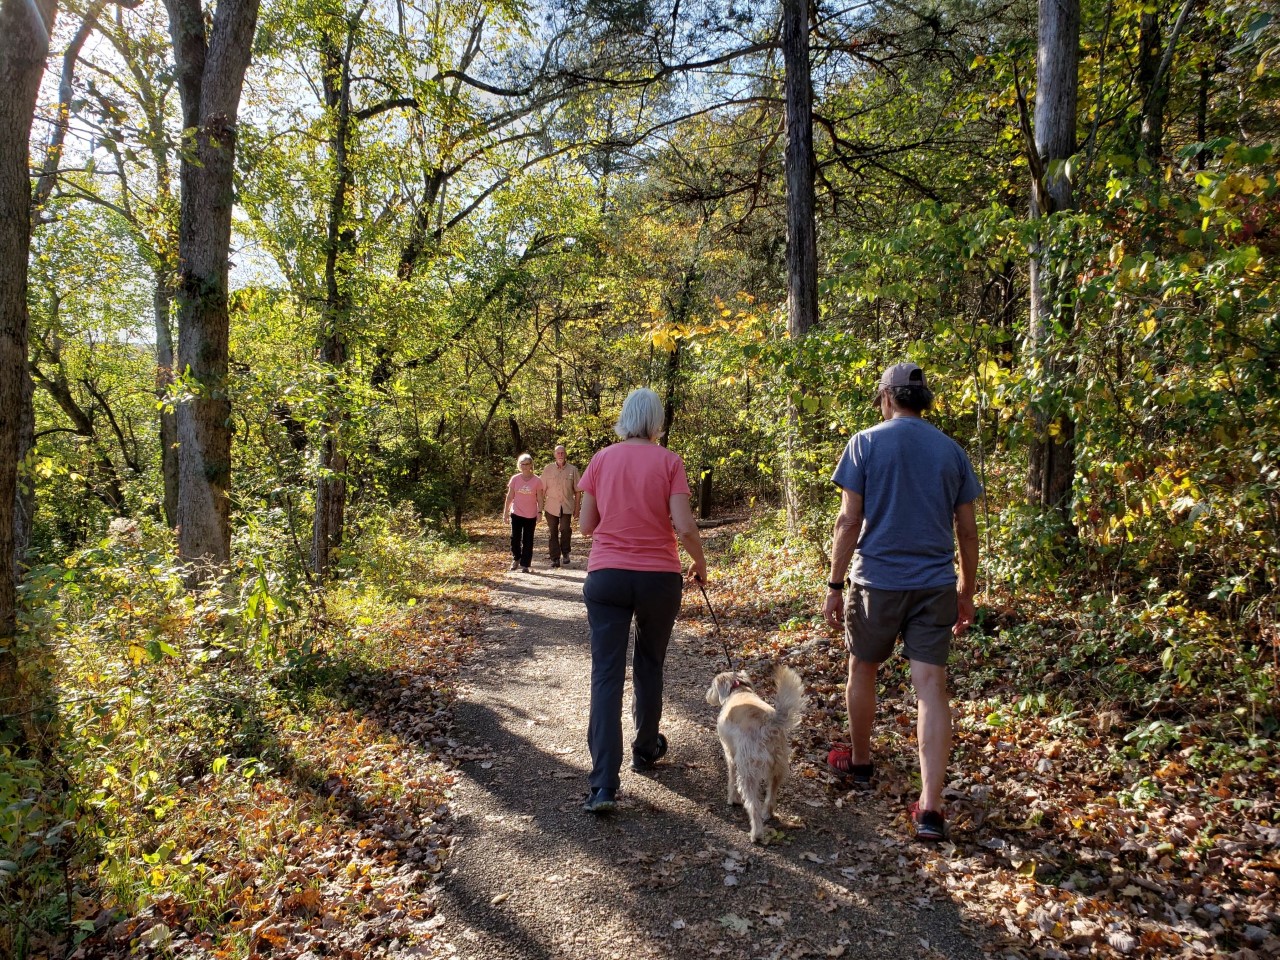 A forested path with four people and a dog walking